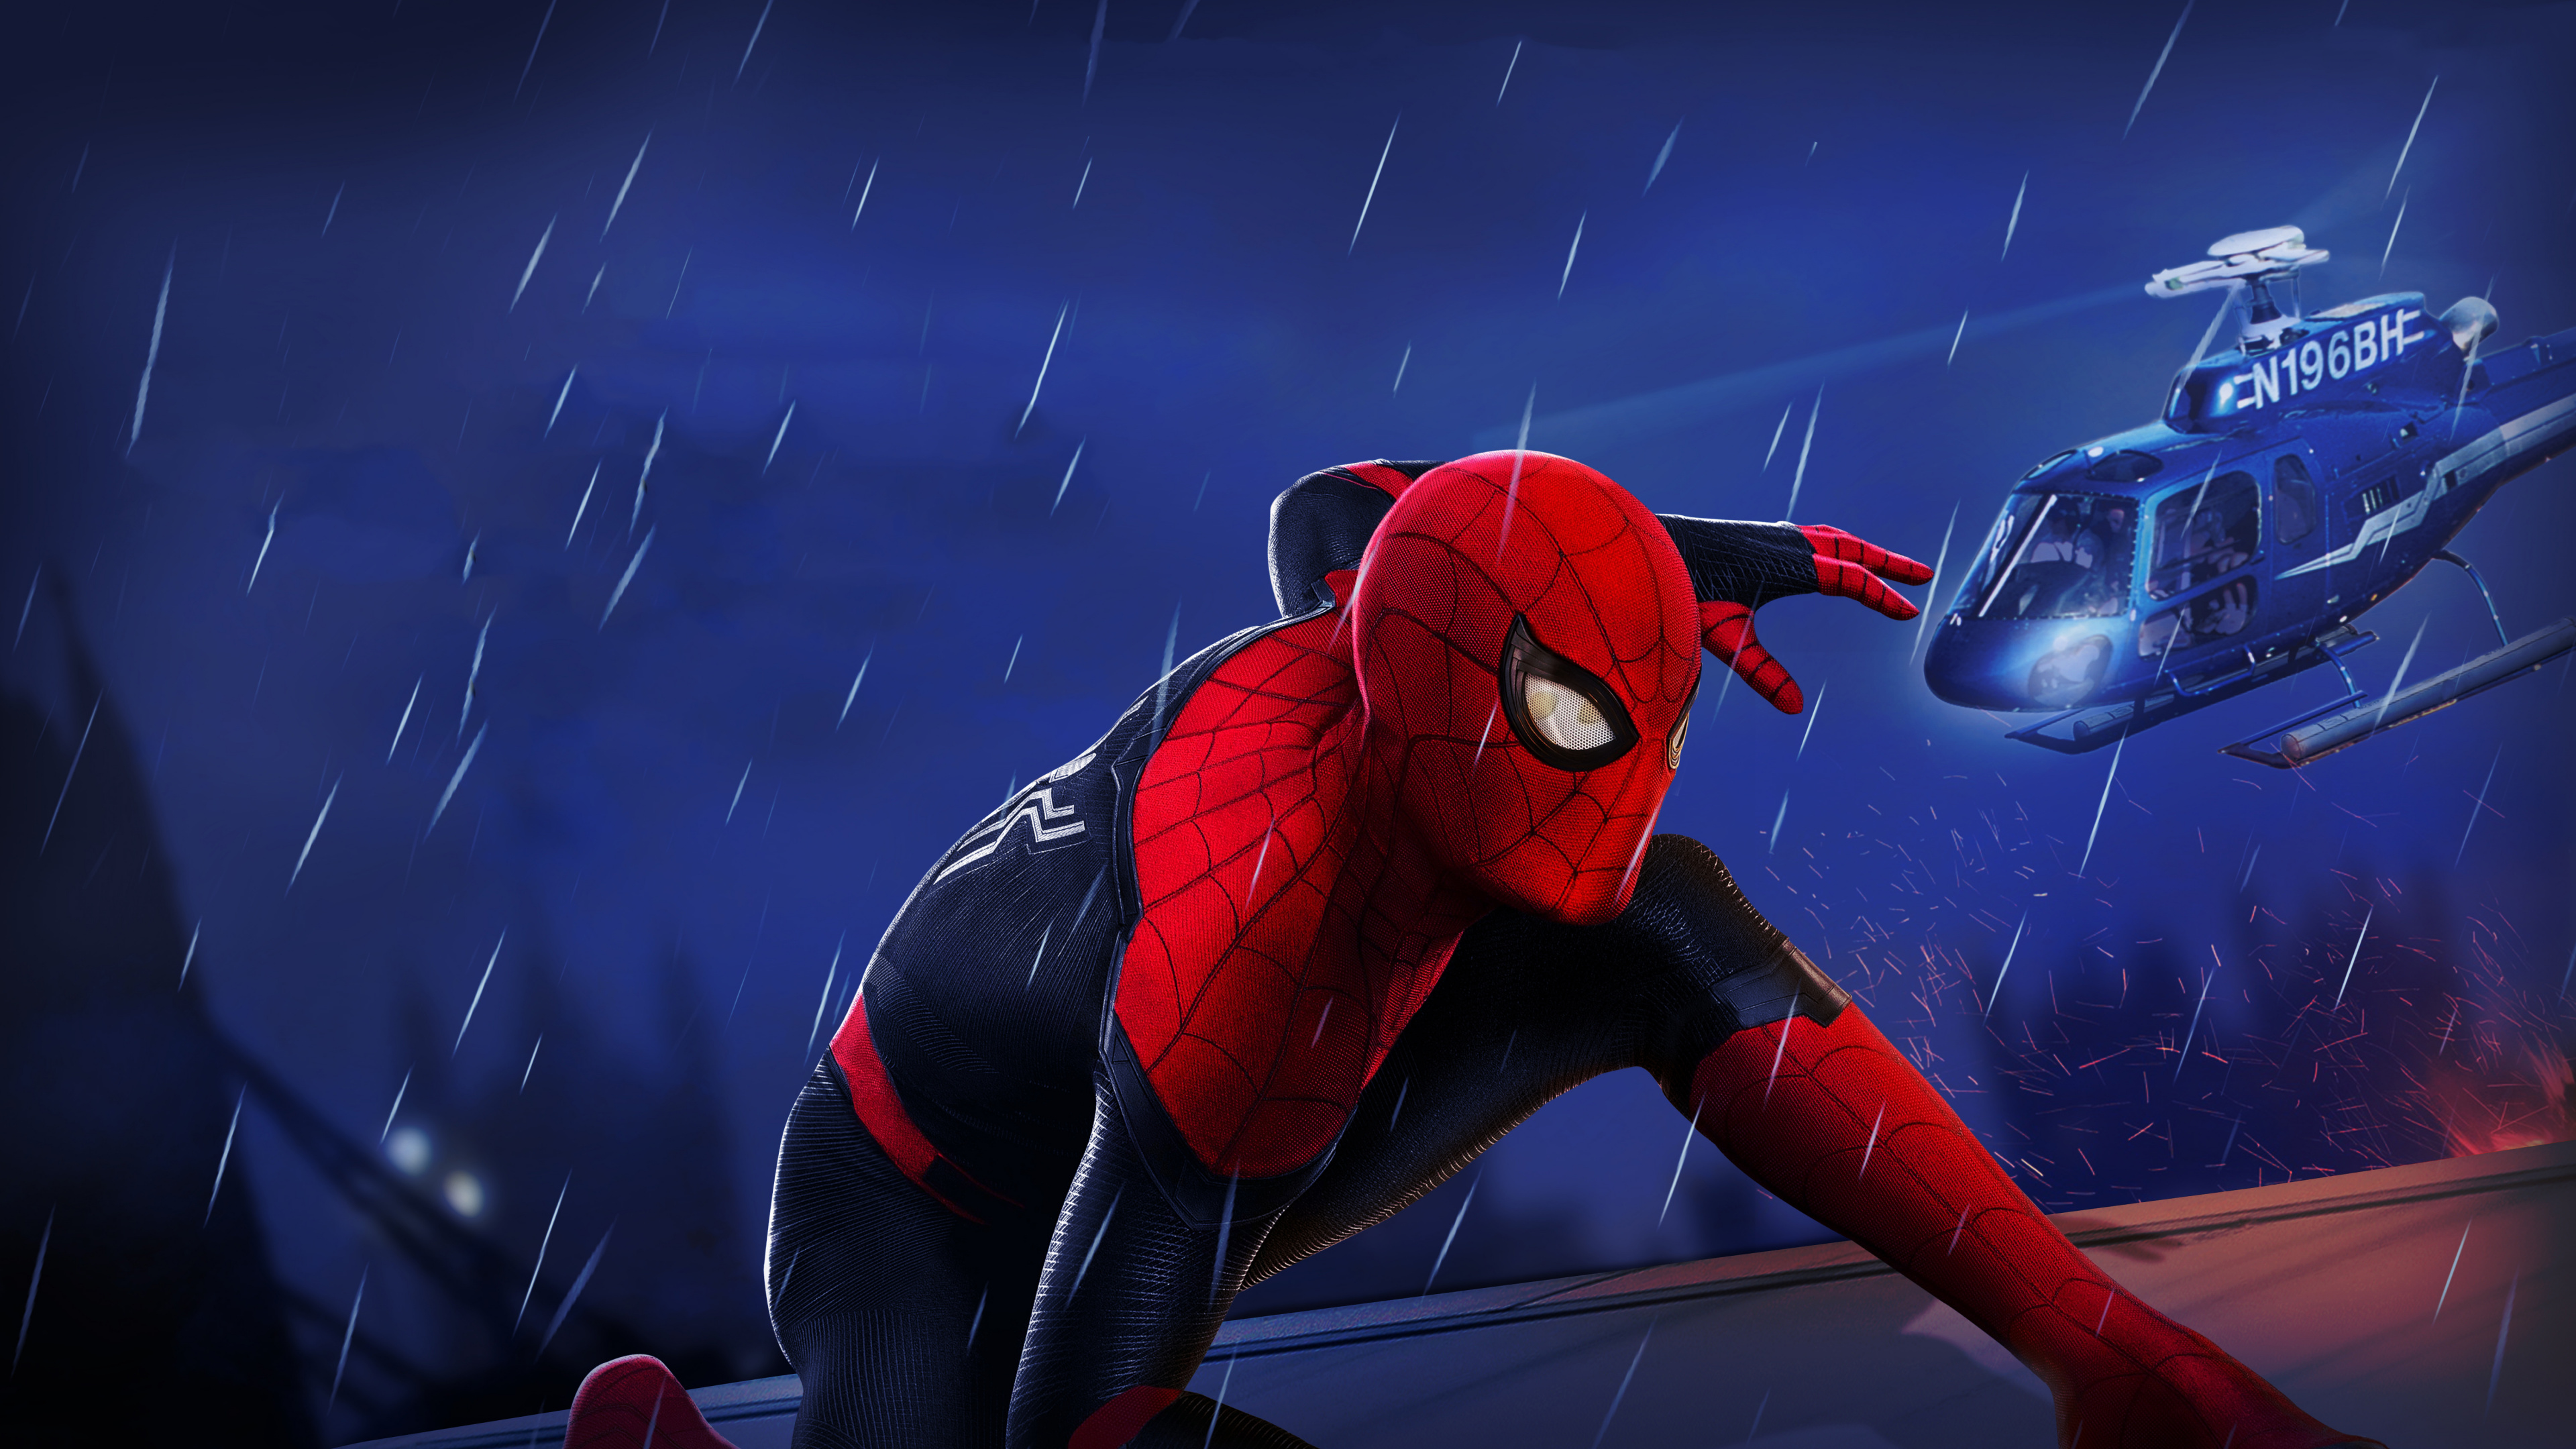 Red and Black Spider Man. Wallpaper in 3840x2160 Resolution